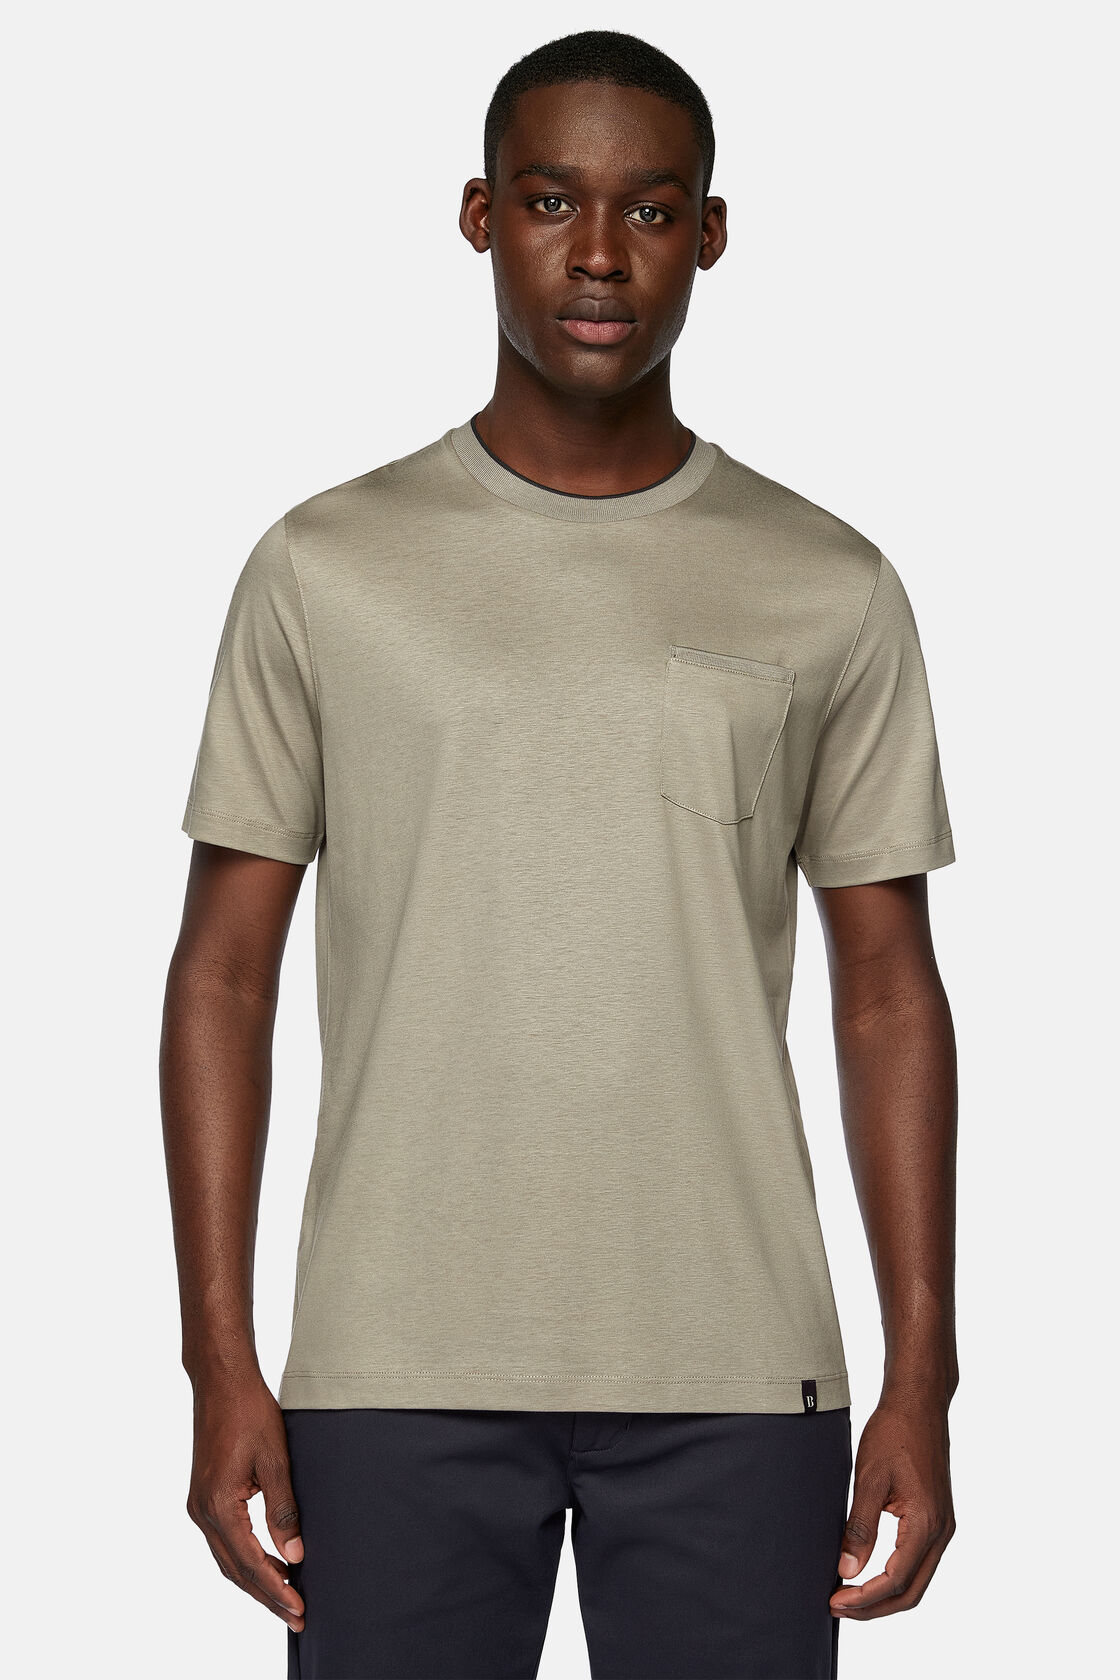 T-Shirt in Cotton and Tencel Jersey, Taupe, hi-res